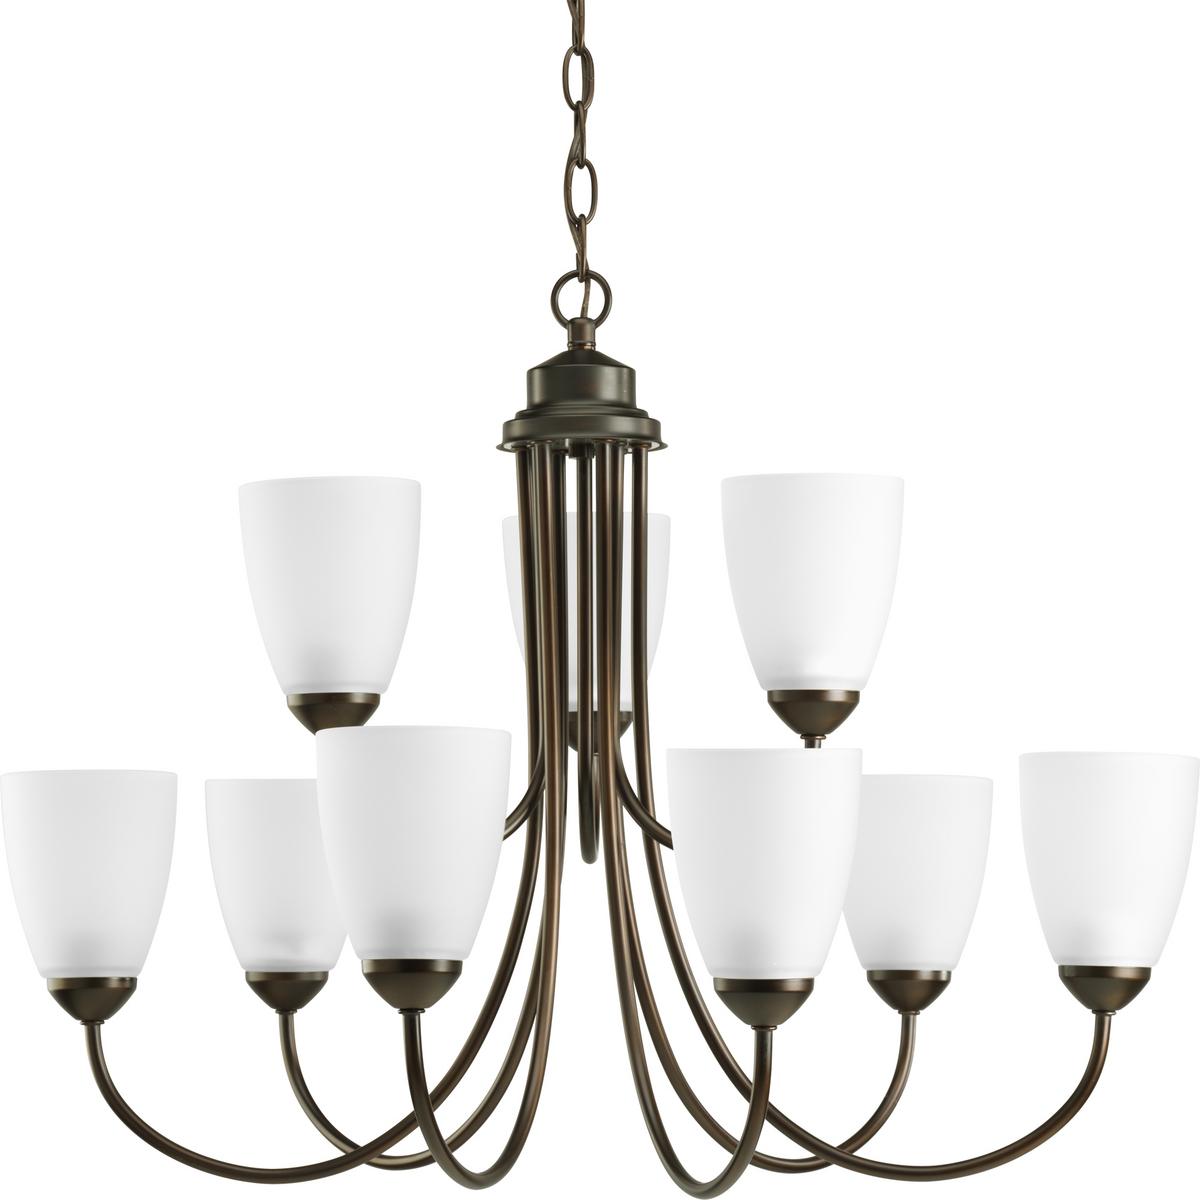 Hubbell P4627-20 Nine-light, two-tier chandelier from Gather possesses a smart simplicity to complement today's home. Antique bronze metal arms descend downwards and curve sharply to prop white etched glass shades. Etched glass add distinction and provide pleasing illumin